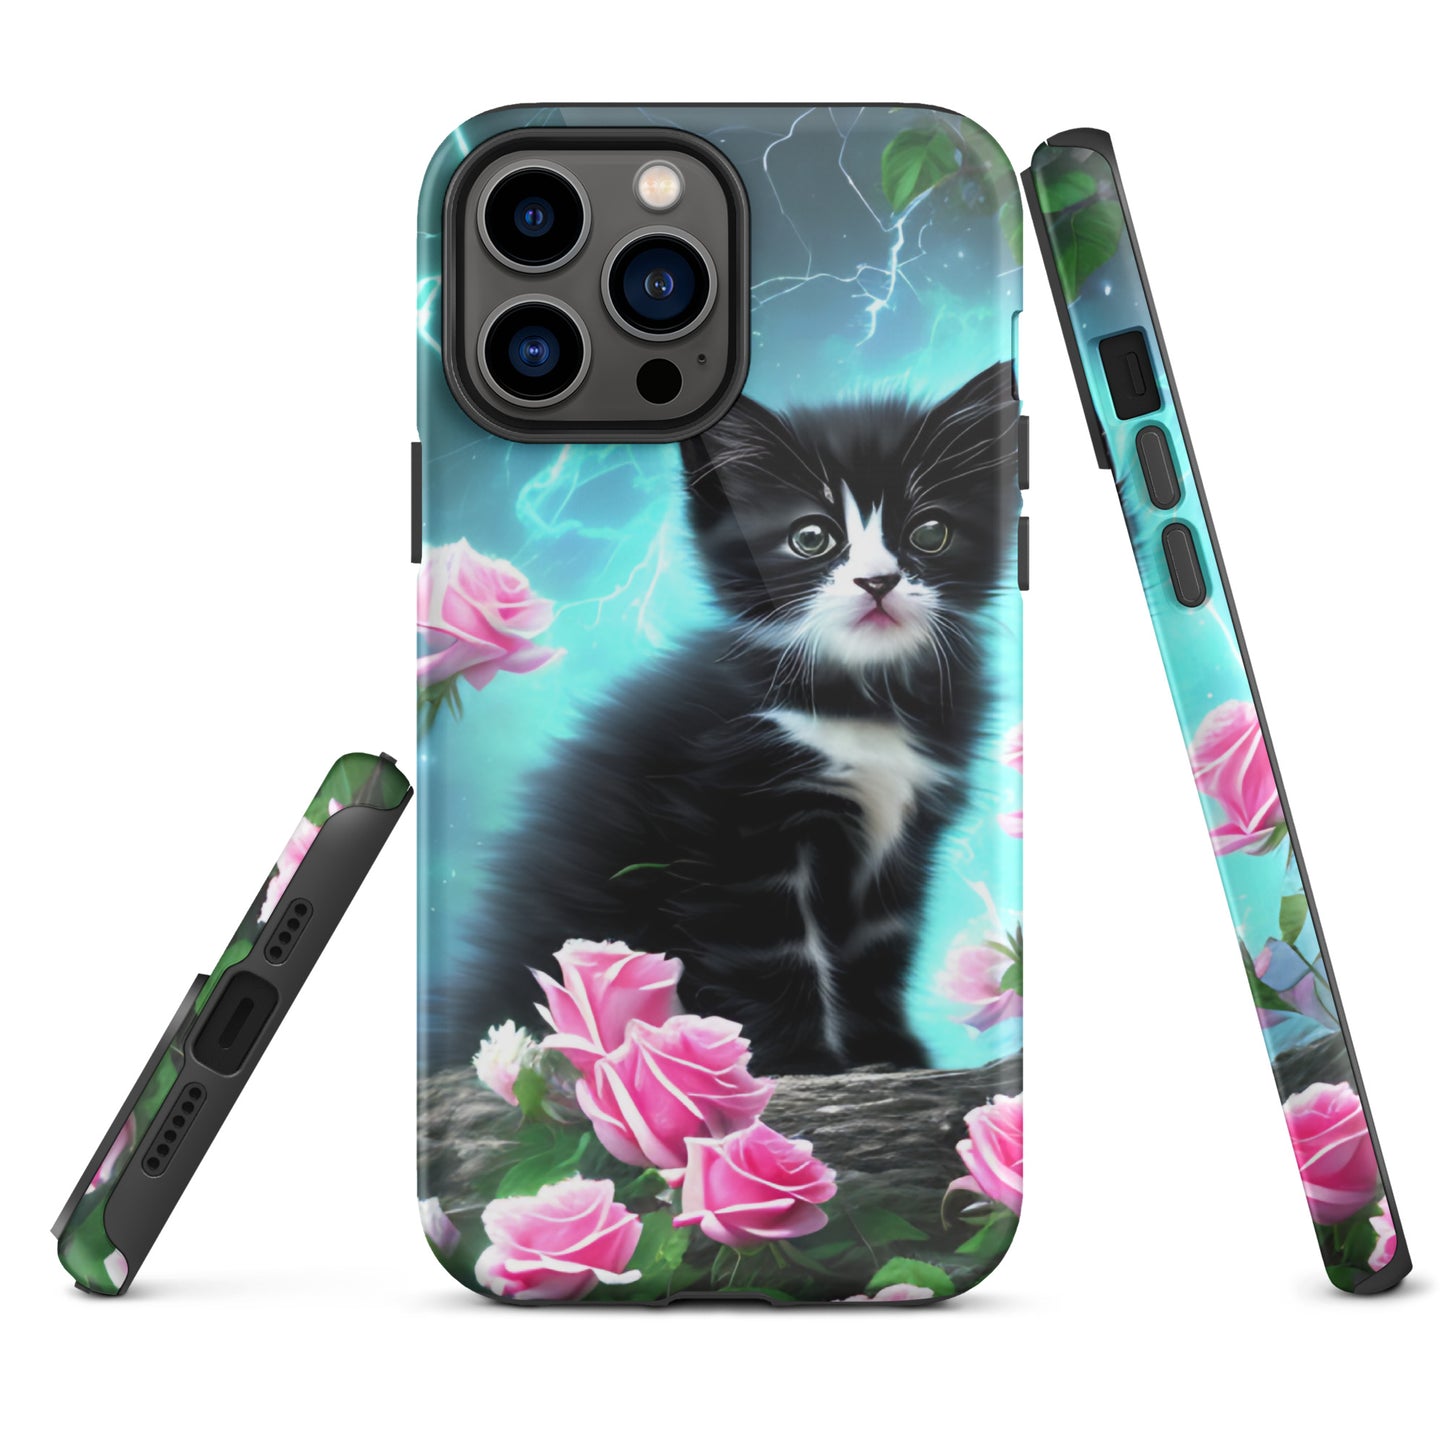 A picture of a iphone tough case with a Black and White Kitten and some pink roses - glossy-iphone-13-pro-max-front